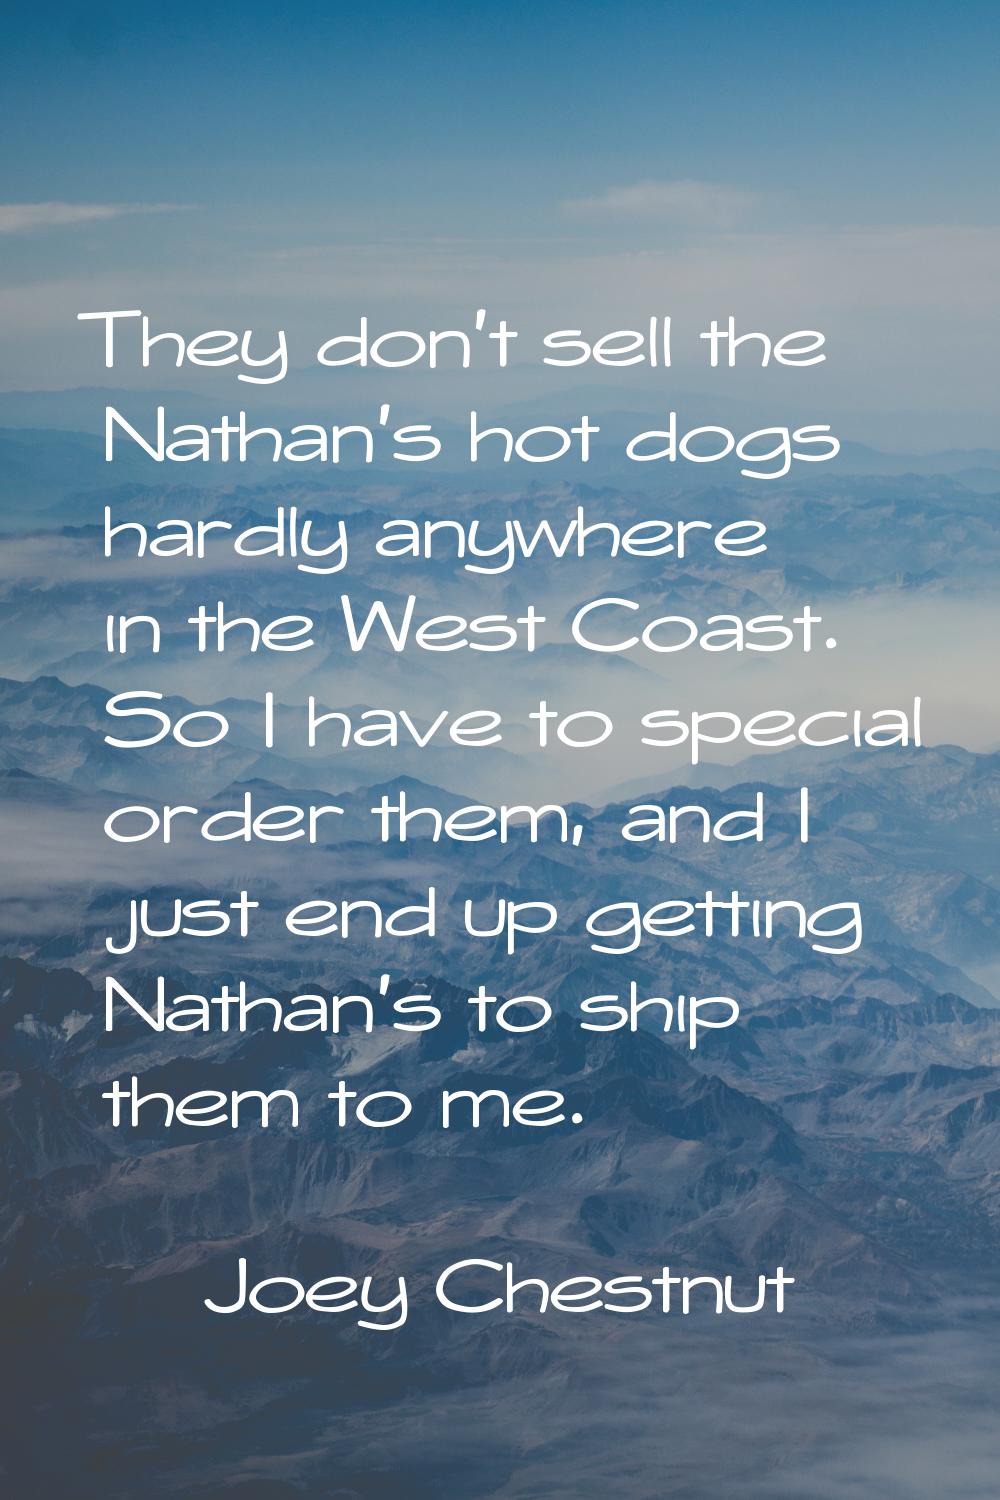 They don't sell the Nathan's hot dogs hardly anywhere in the West Coast. So I have to special order